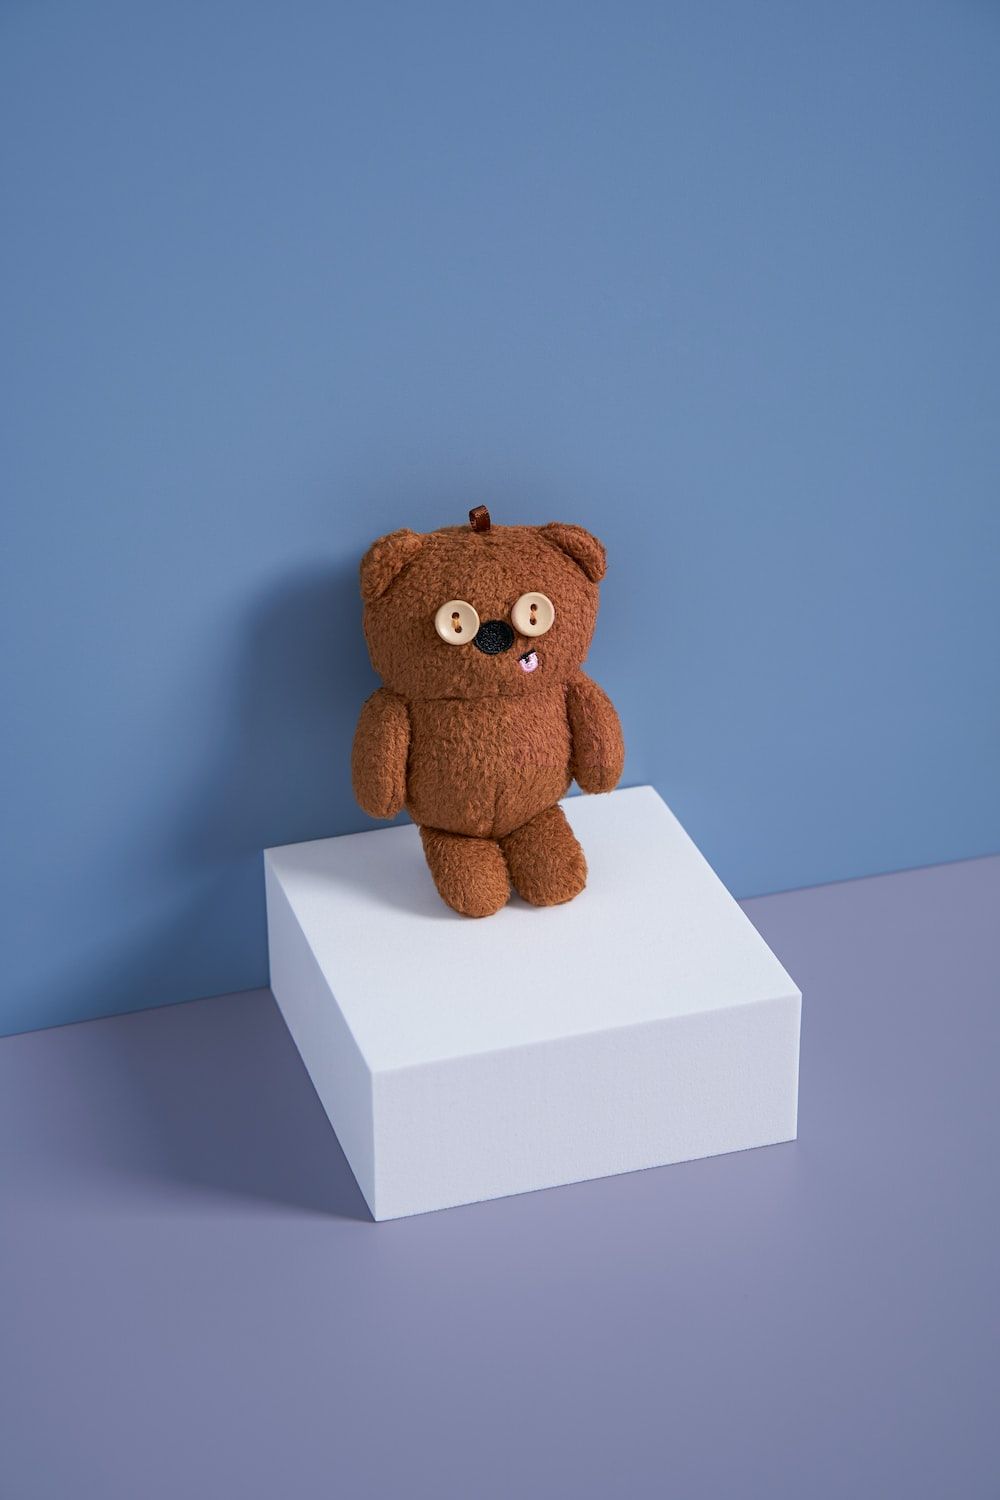 A brown teddy bear sitting on top of a white box photo